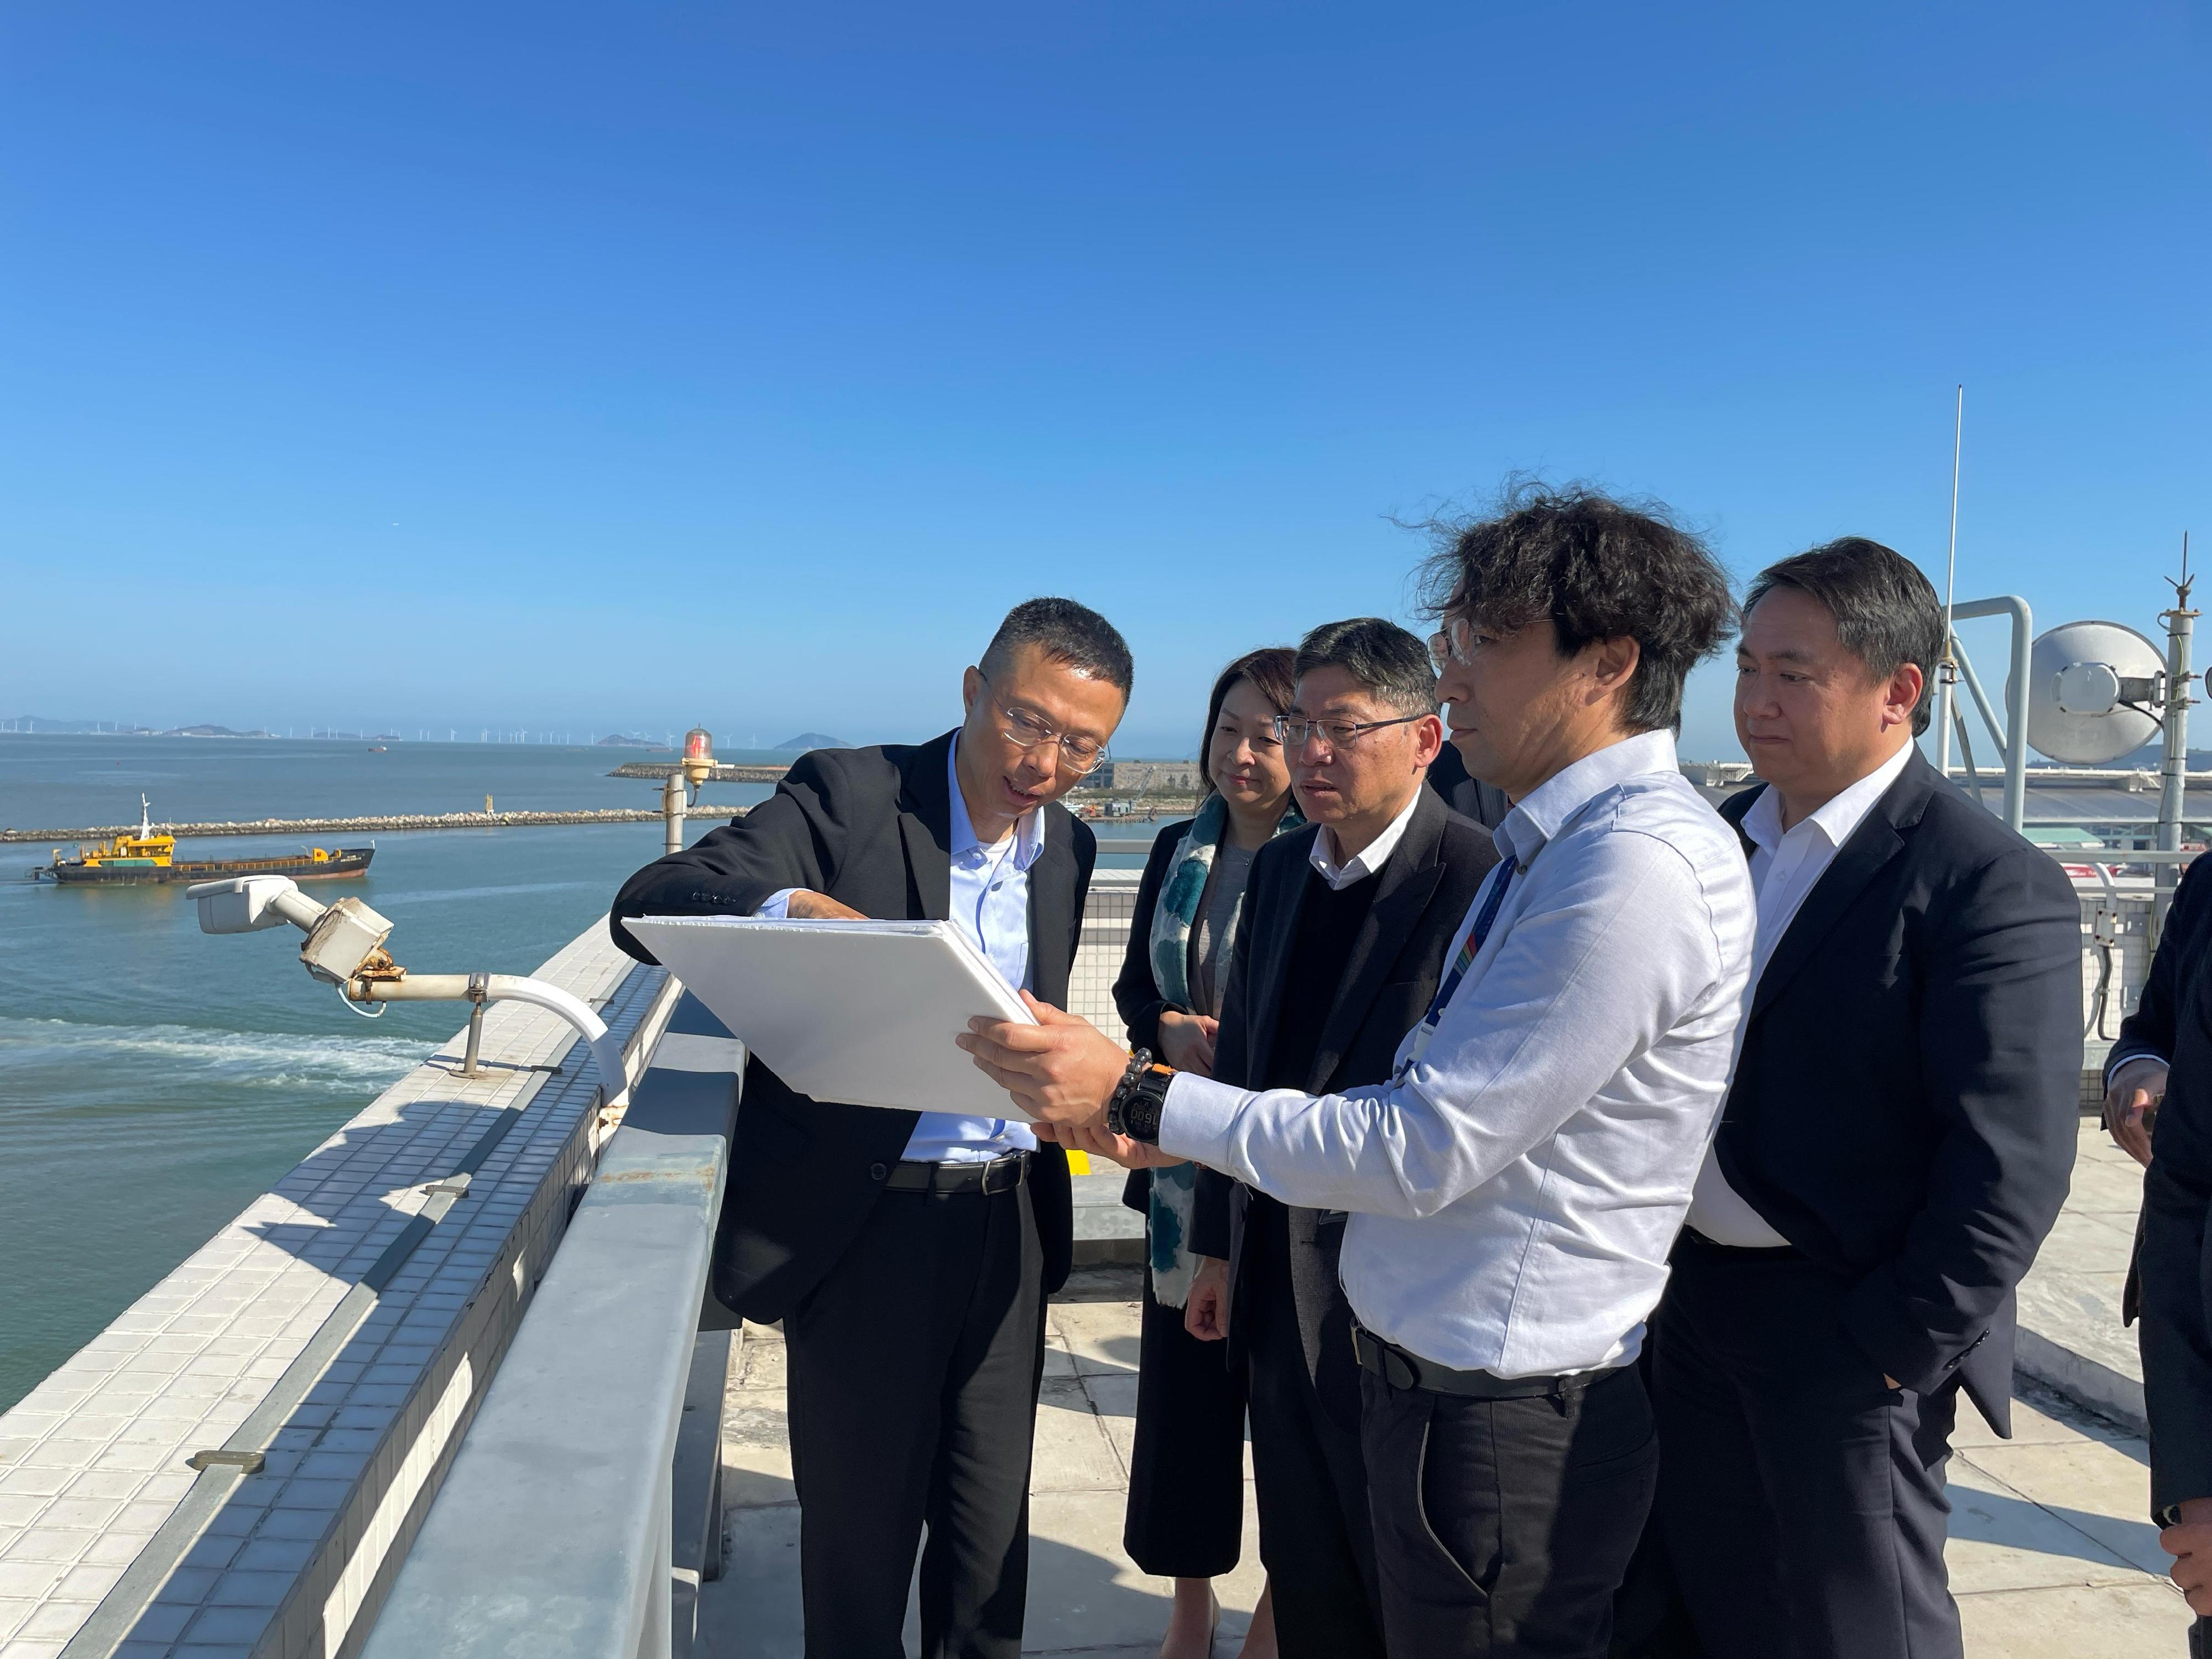 The Secretary for Transport and Logistics, Mr Lam Sai-hung, visited Zhuhai and Macao today (March 12). Photo shows Mr Lam (centre) being briefed by the Director of the Macao Transport Bureau, Mr Lam Hin-san (first left), on the fourth Macao-Taipa bridge. Also present is the Commissioner for Transport, Ms Angela Lee (second left).